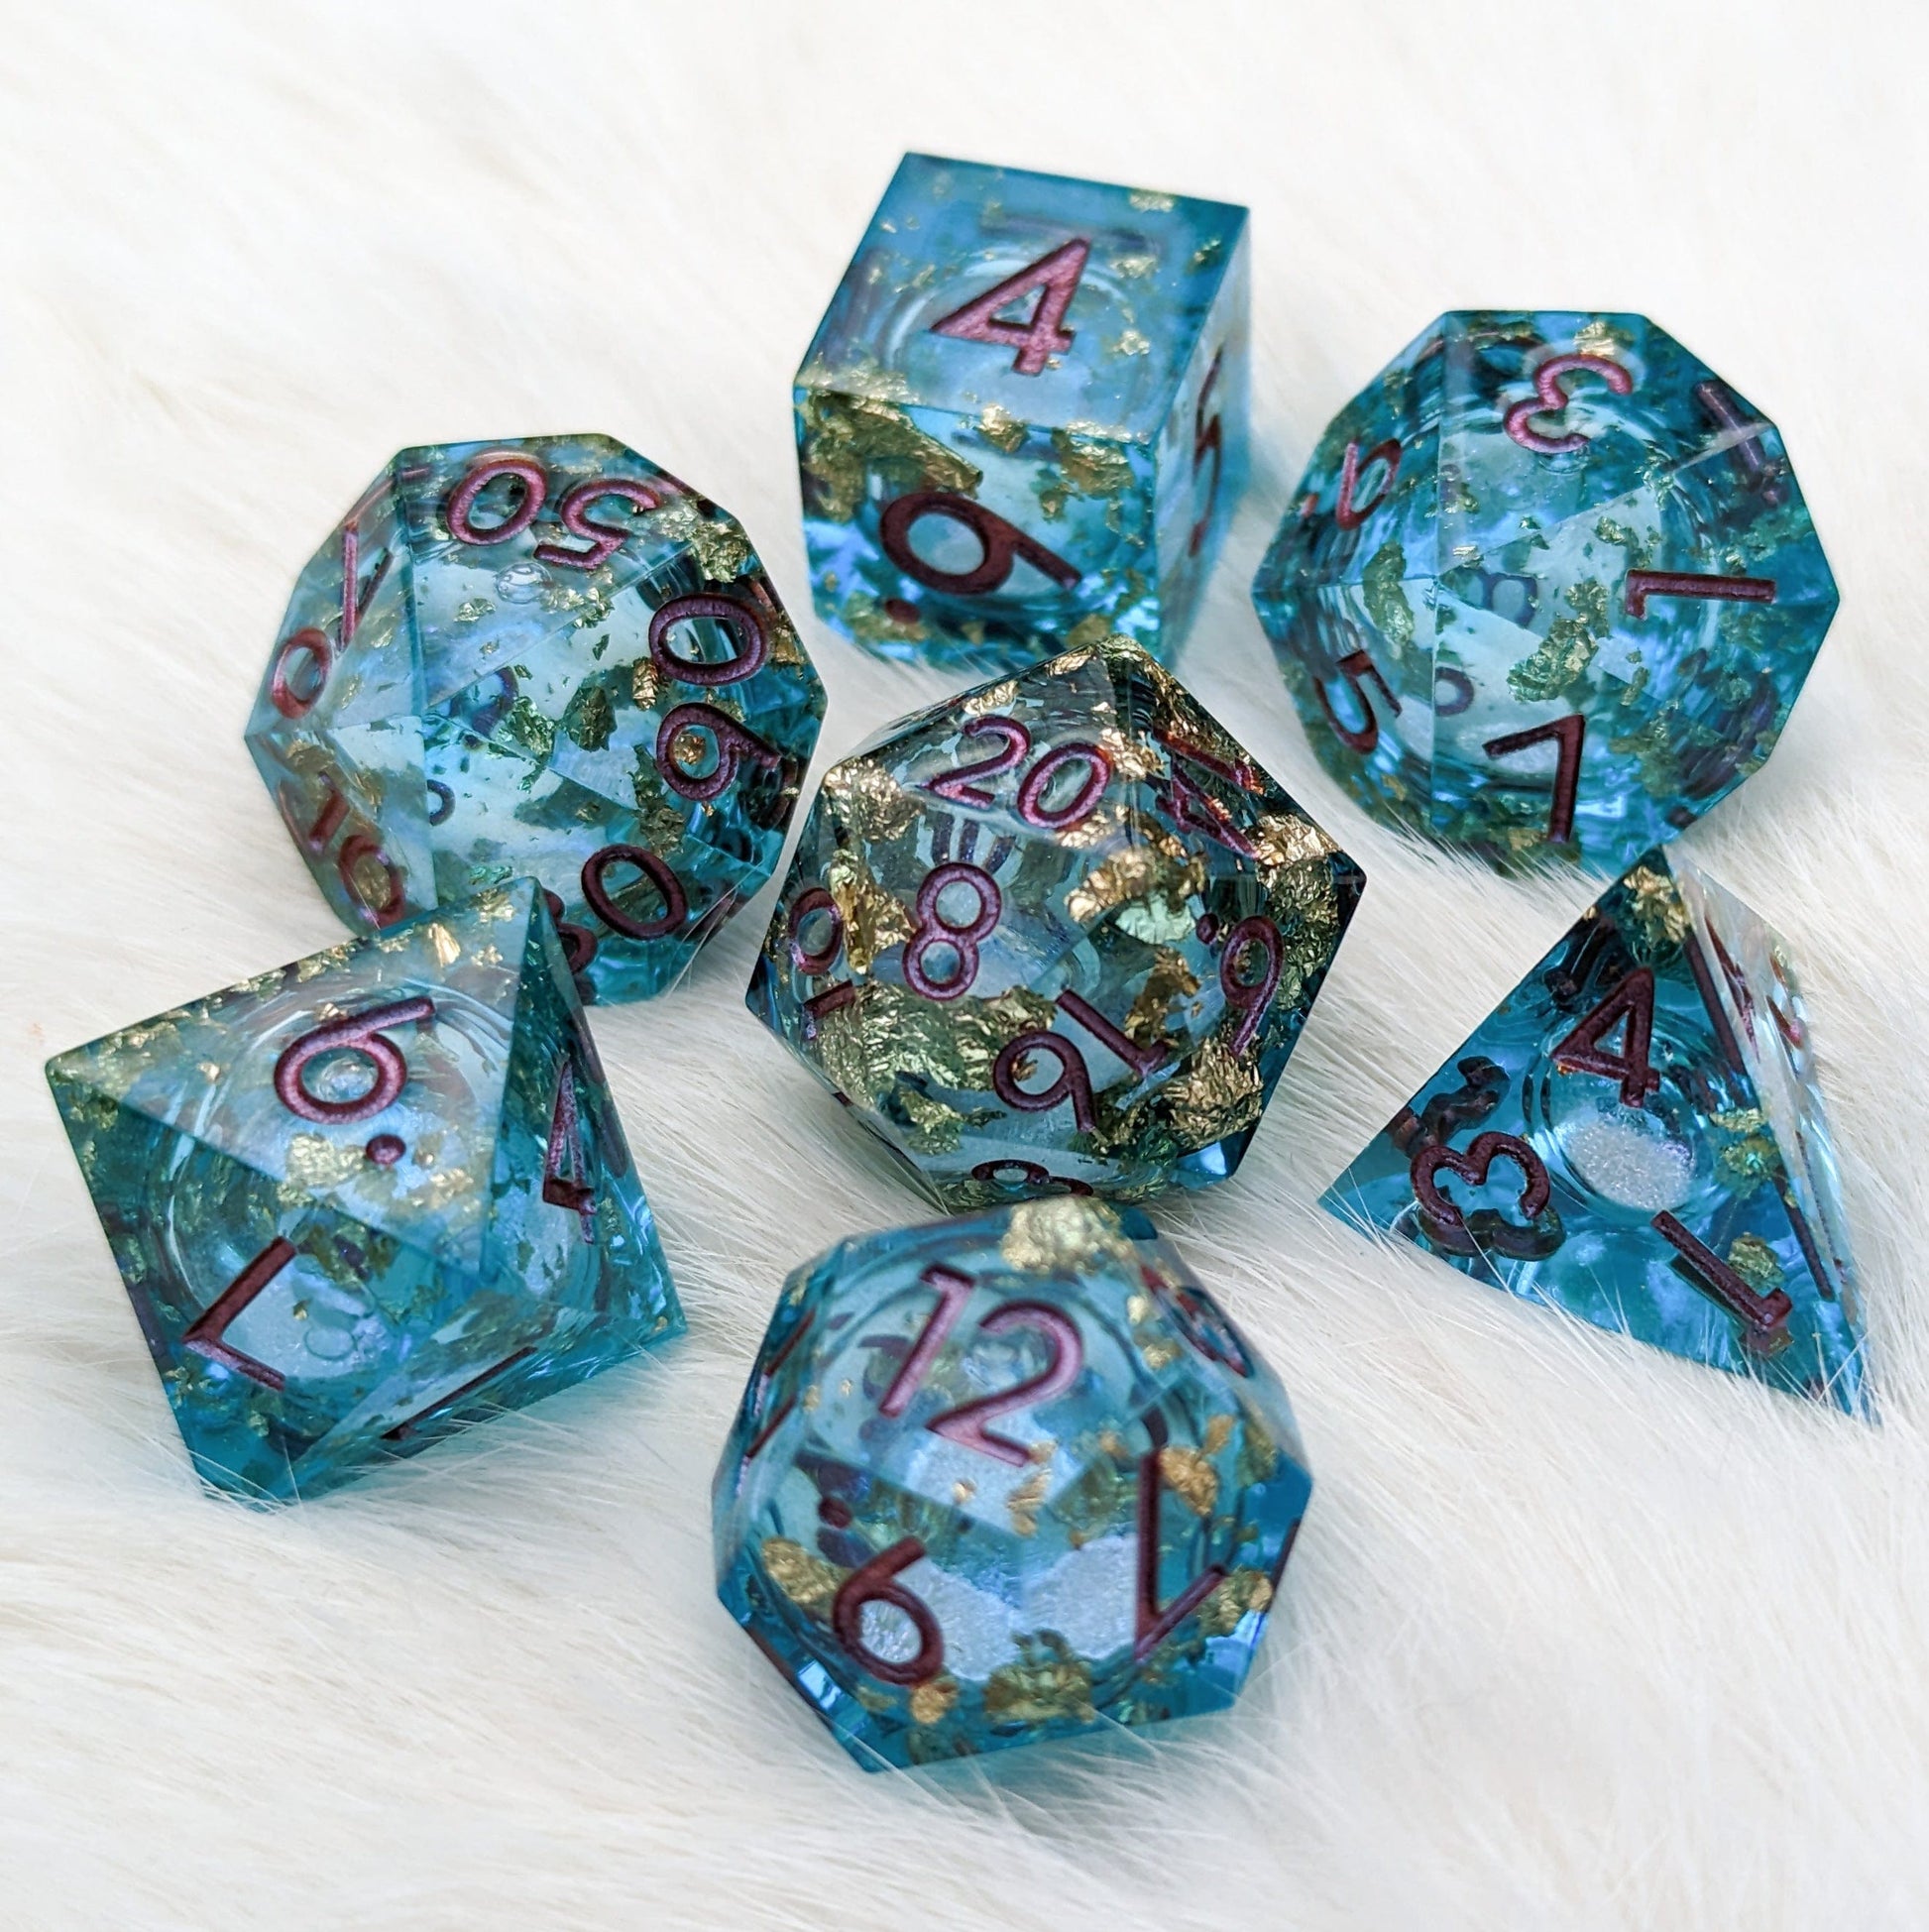 Teal and Gold Liquid Core Sharp Edge Resin DnD Dice Set